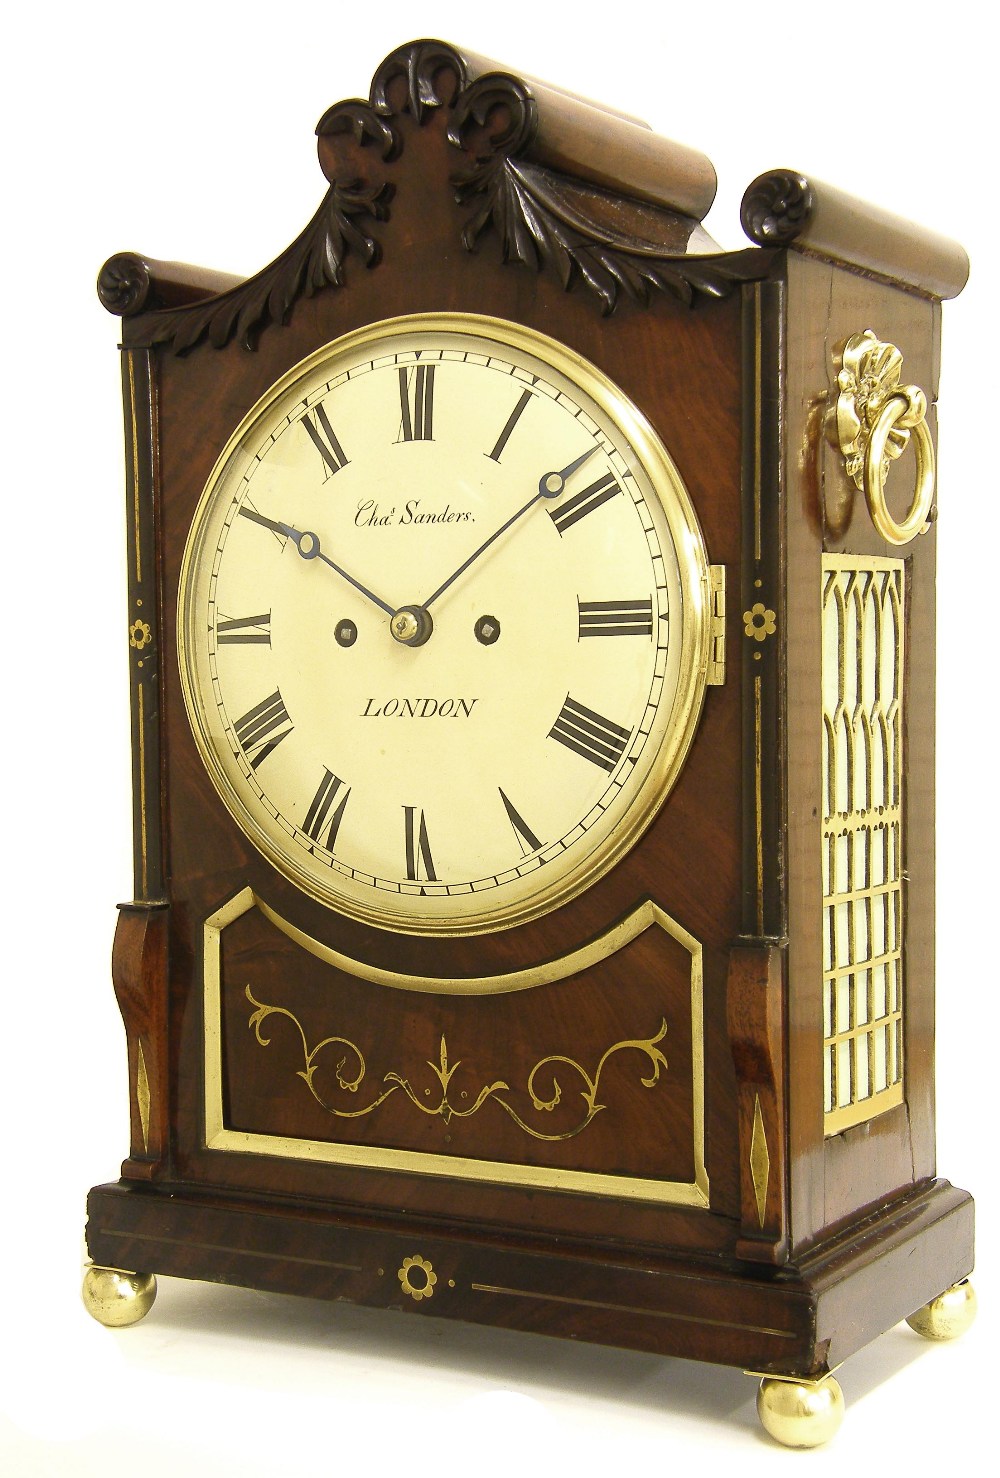 English mahogany inlaid double fusee bracket clock, the movement striking on a bell, the 8" convex